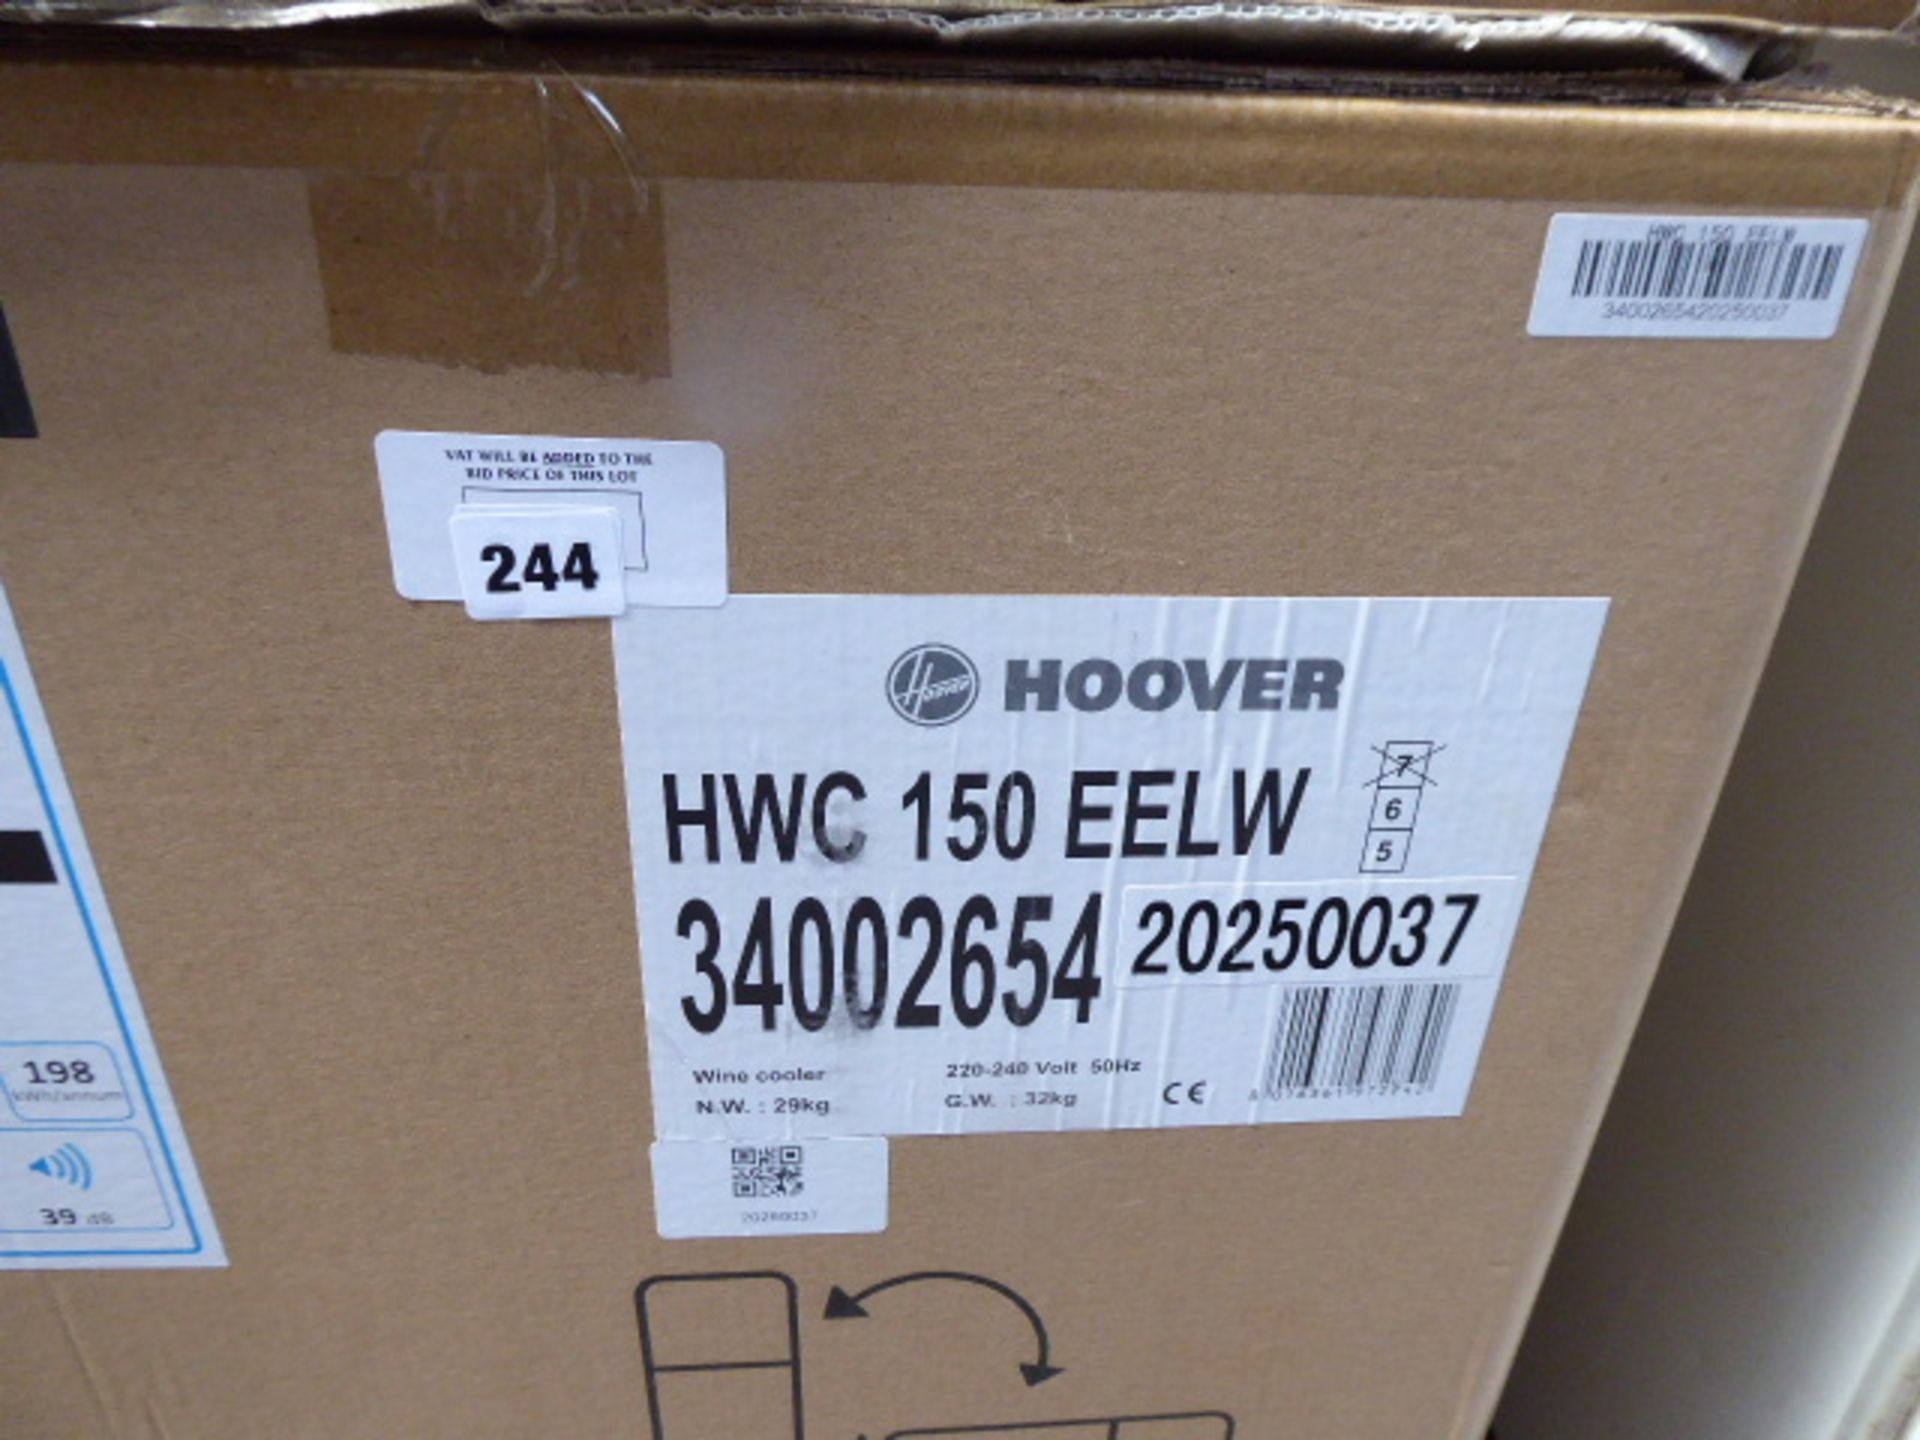 (356) Hoover HWC 150 EELW low level wine cooler with box and instructions, with continental plug and - Image 2 of 2